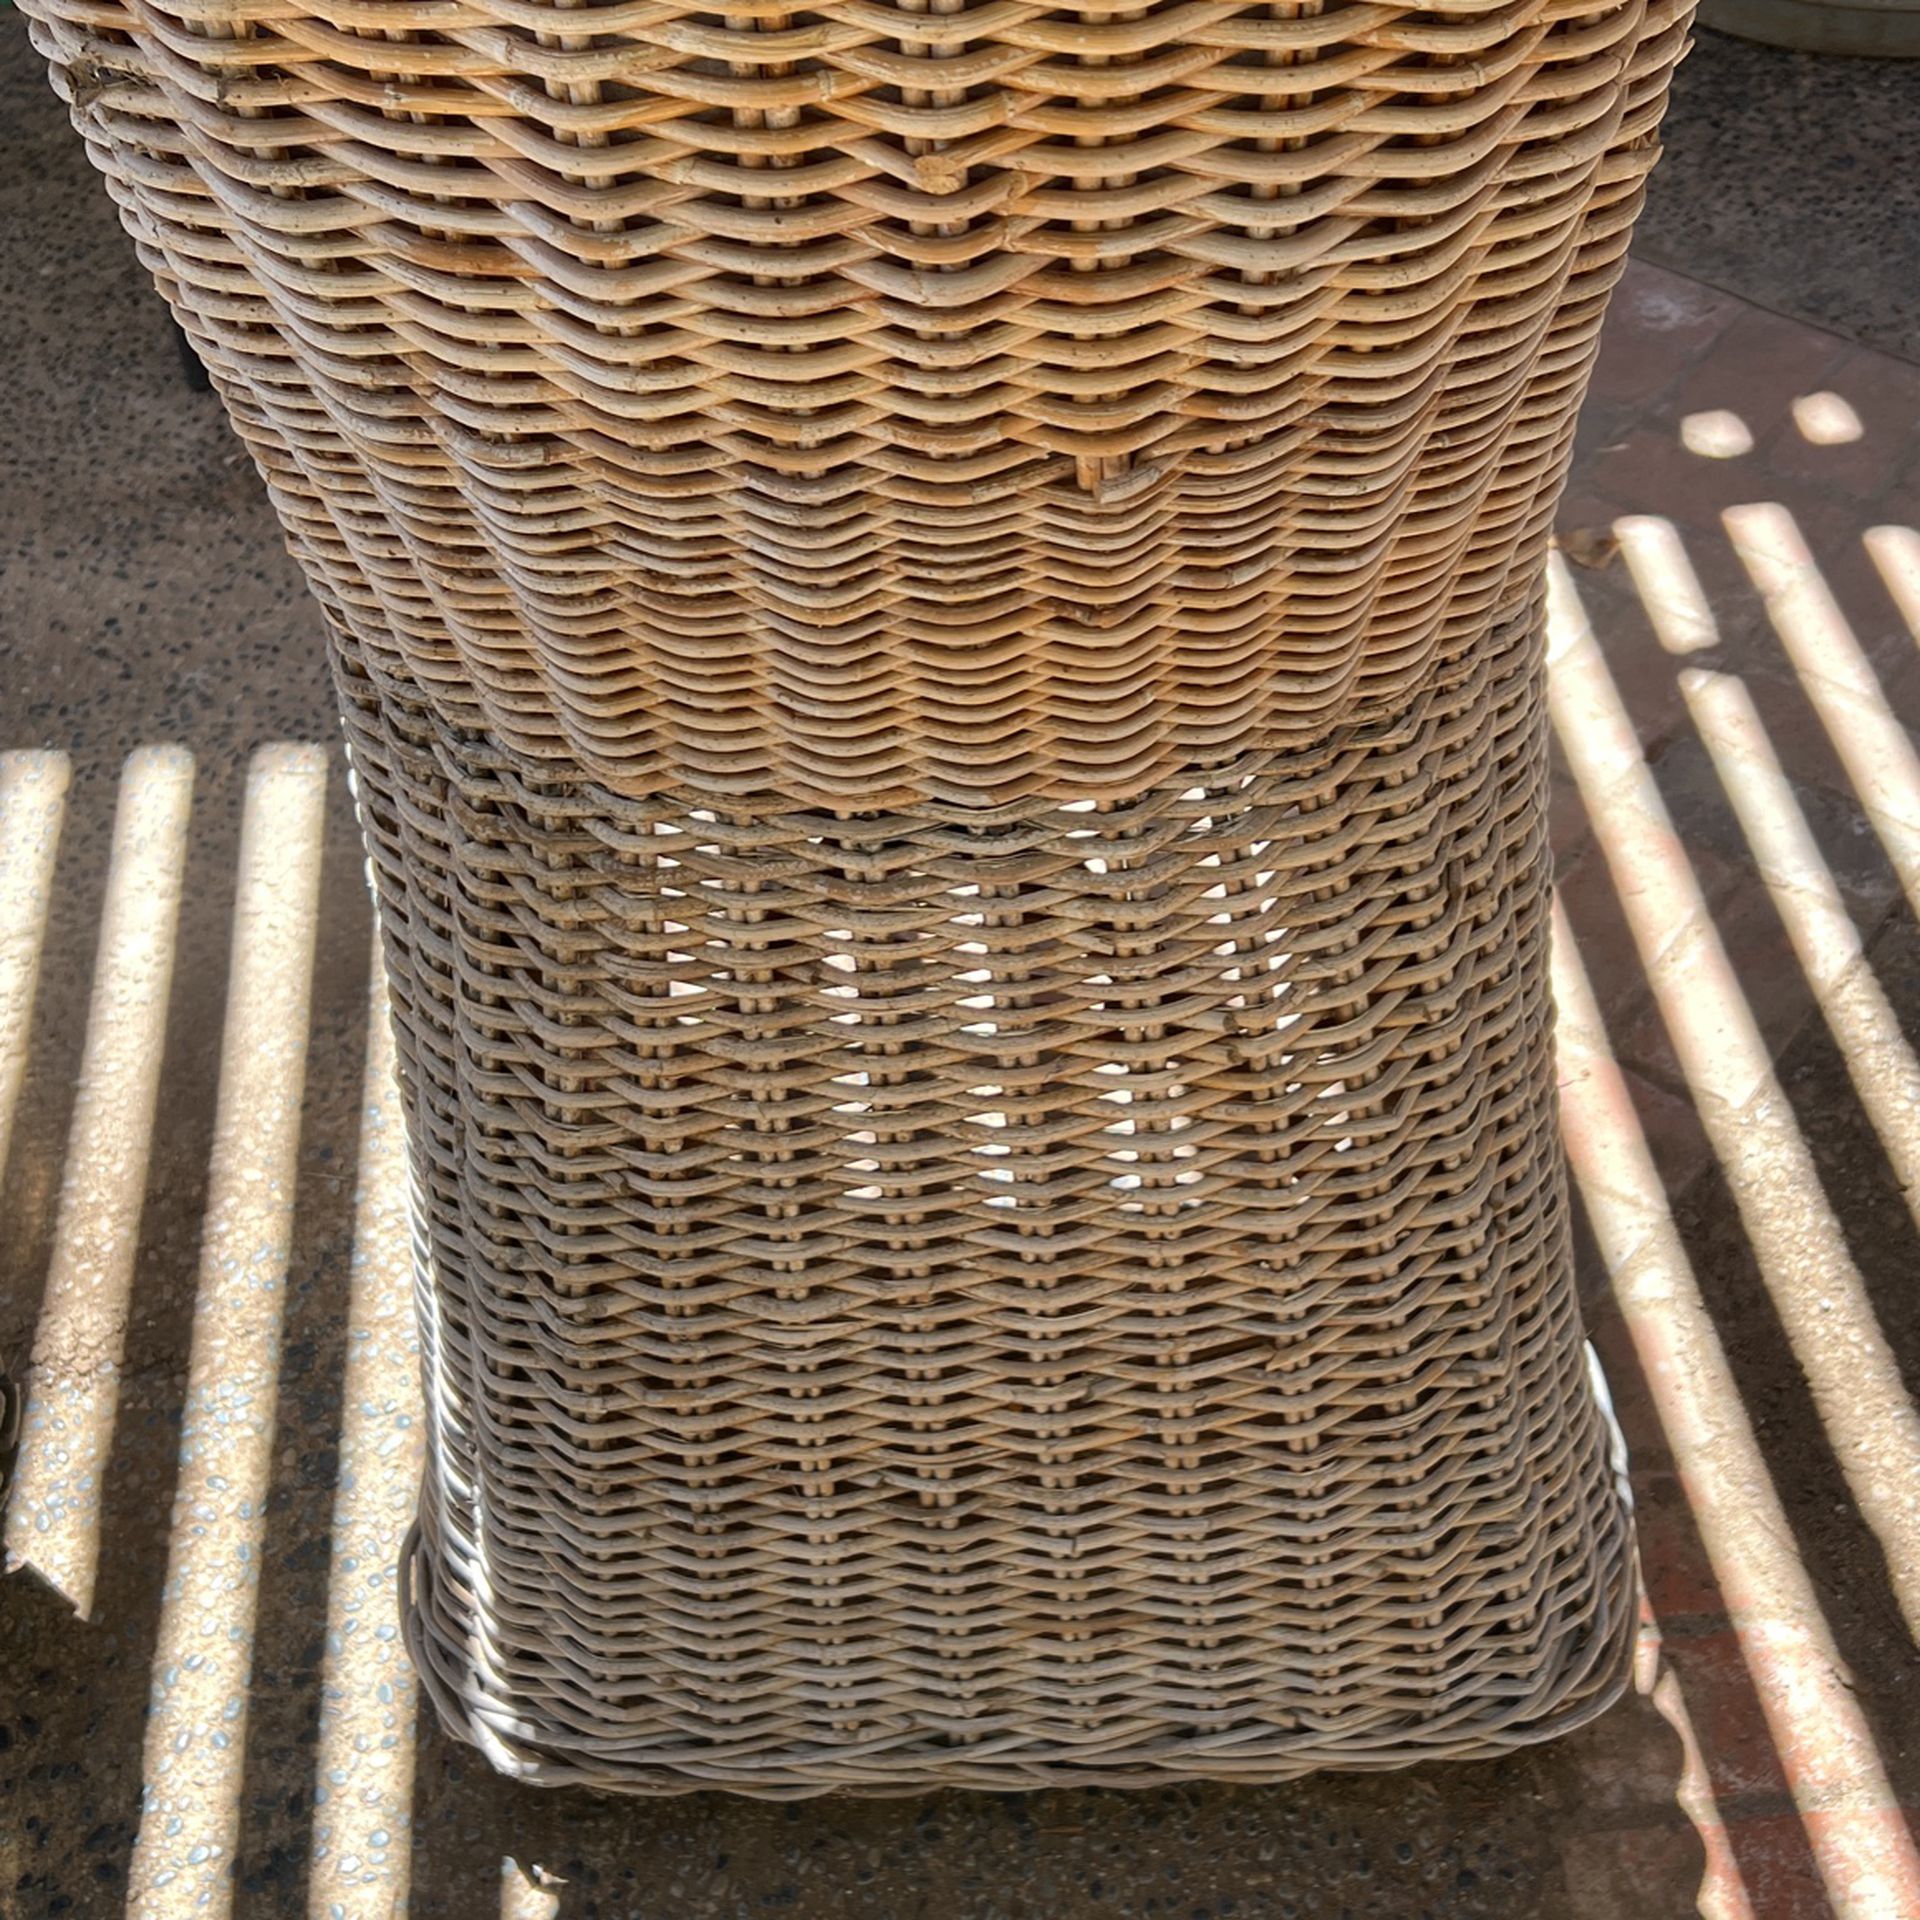 3 Outdoor Chairs